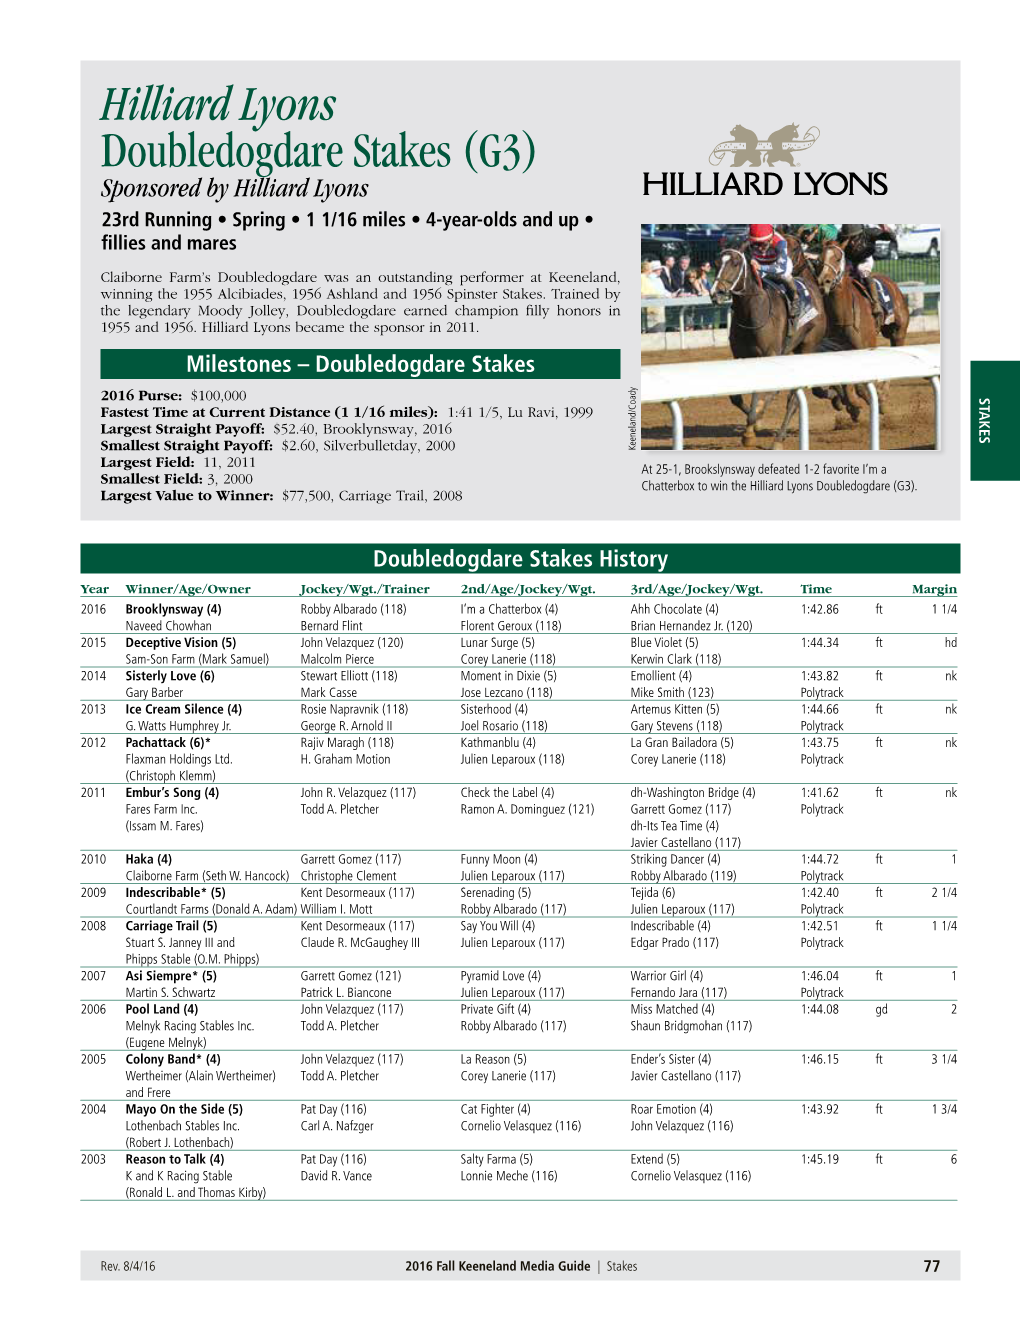 Hilliard Lyons Doubledogdare Stakes (G3) Sponsored by Hilliard Lyons 23Rd Running • Spring • 1 1/16 Miles • 4-Year-Olds and up • Fillies and Mares